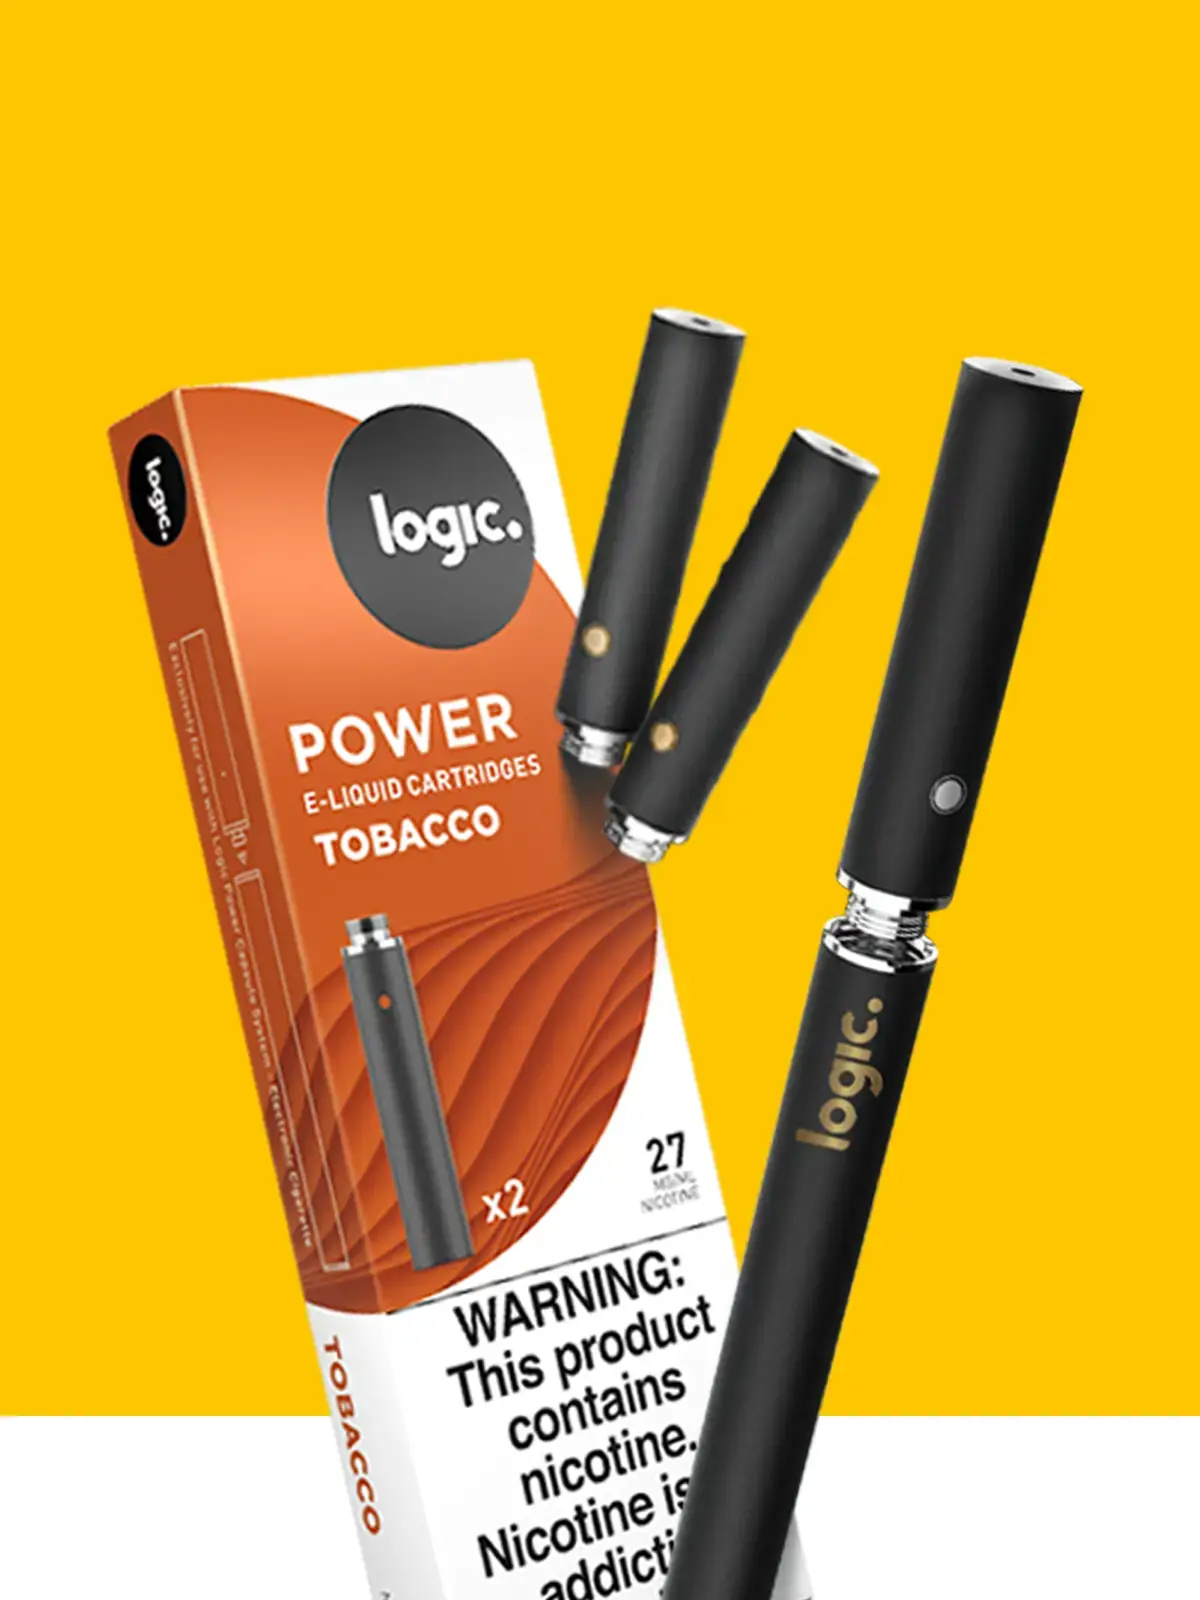 A Logic Power device with a pack of Logic Power Tobacco flavoured e-liquid cartridge refills where two refills are floating beside them. In front of a yellow background